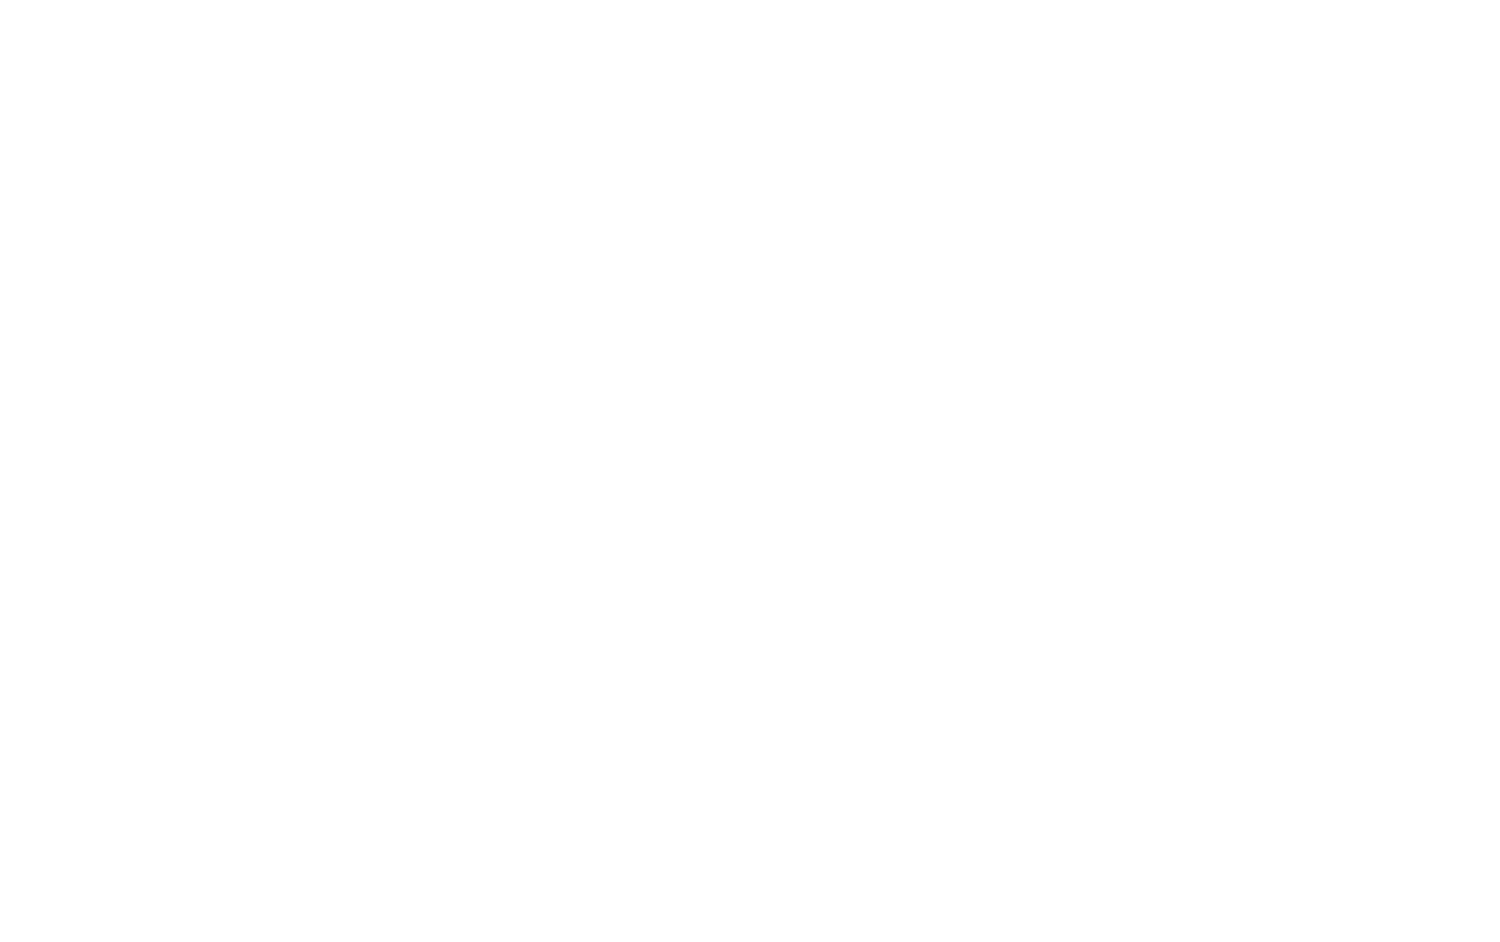 GIFTS FOR CONFIDENCE